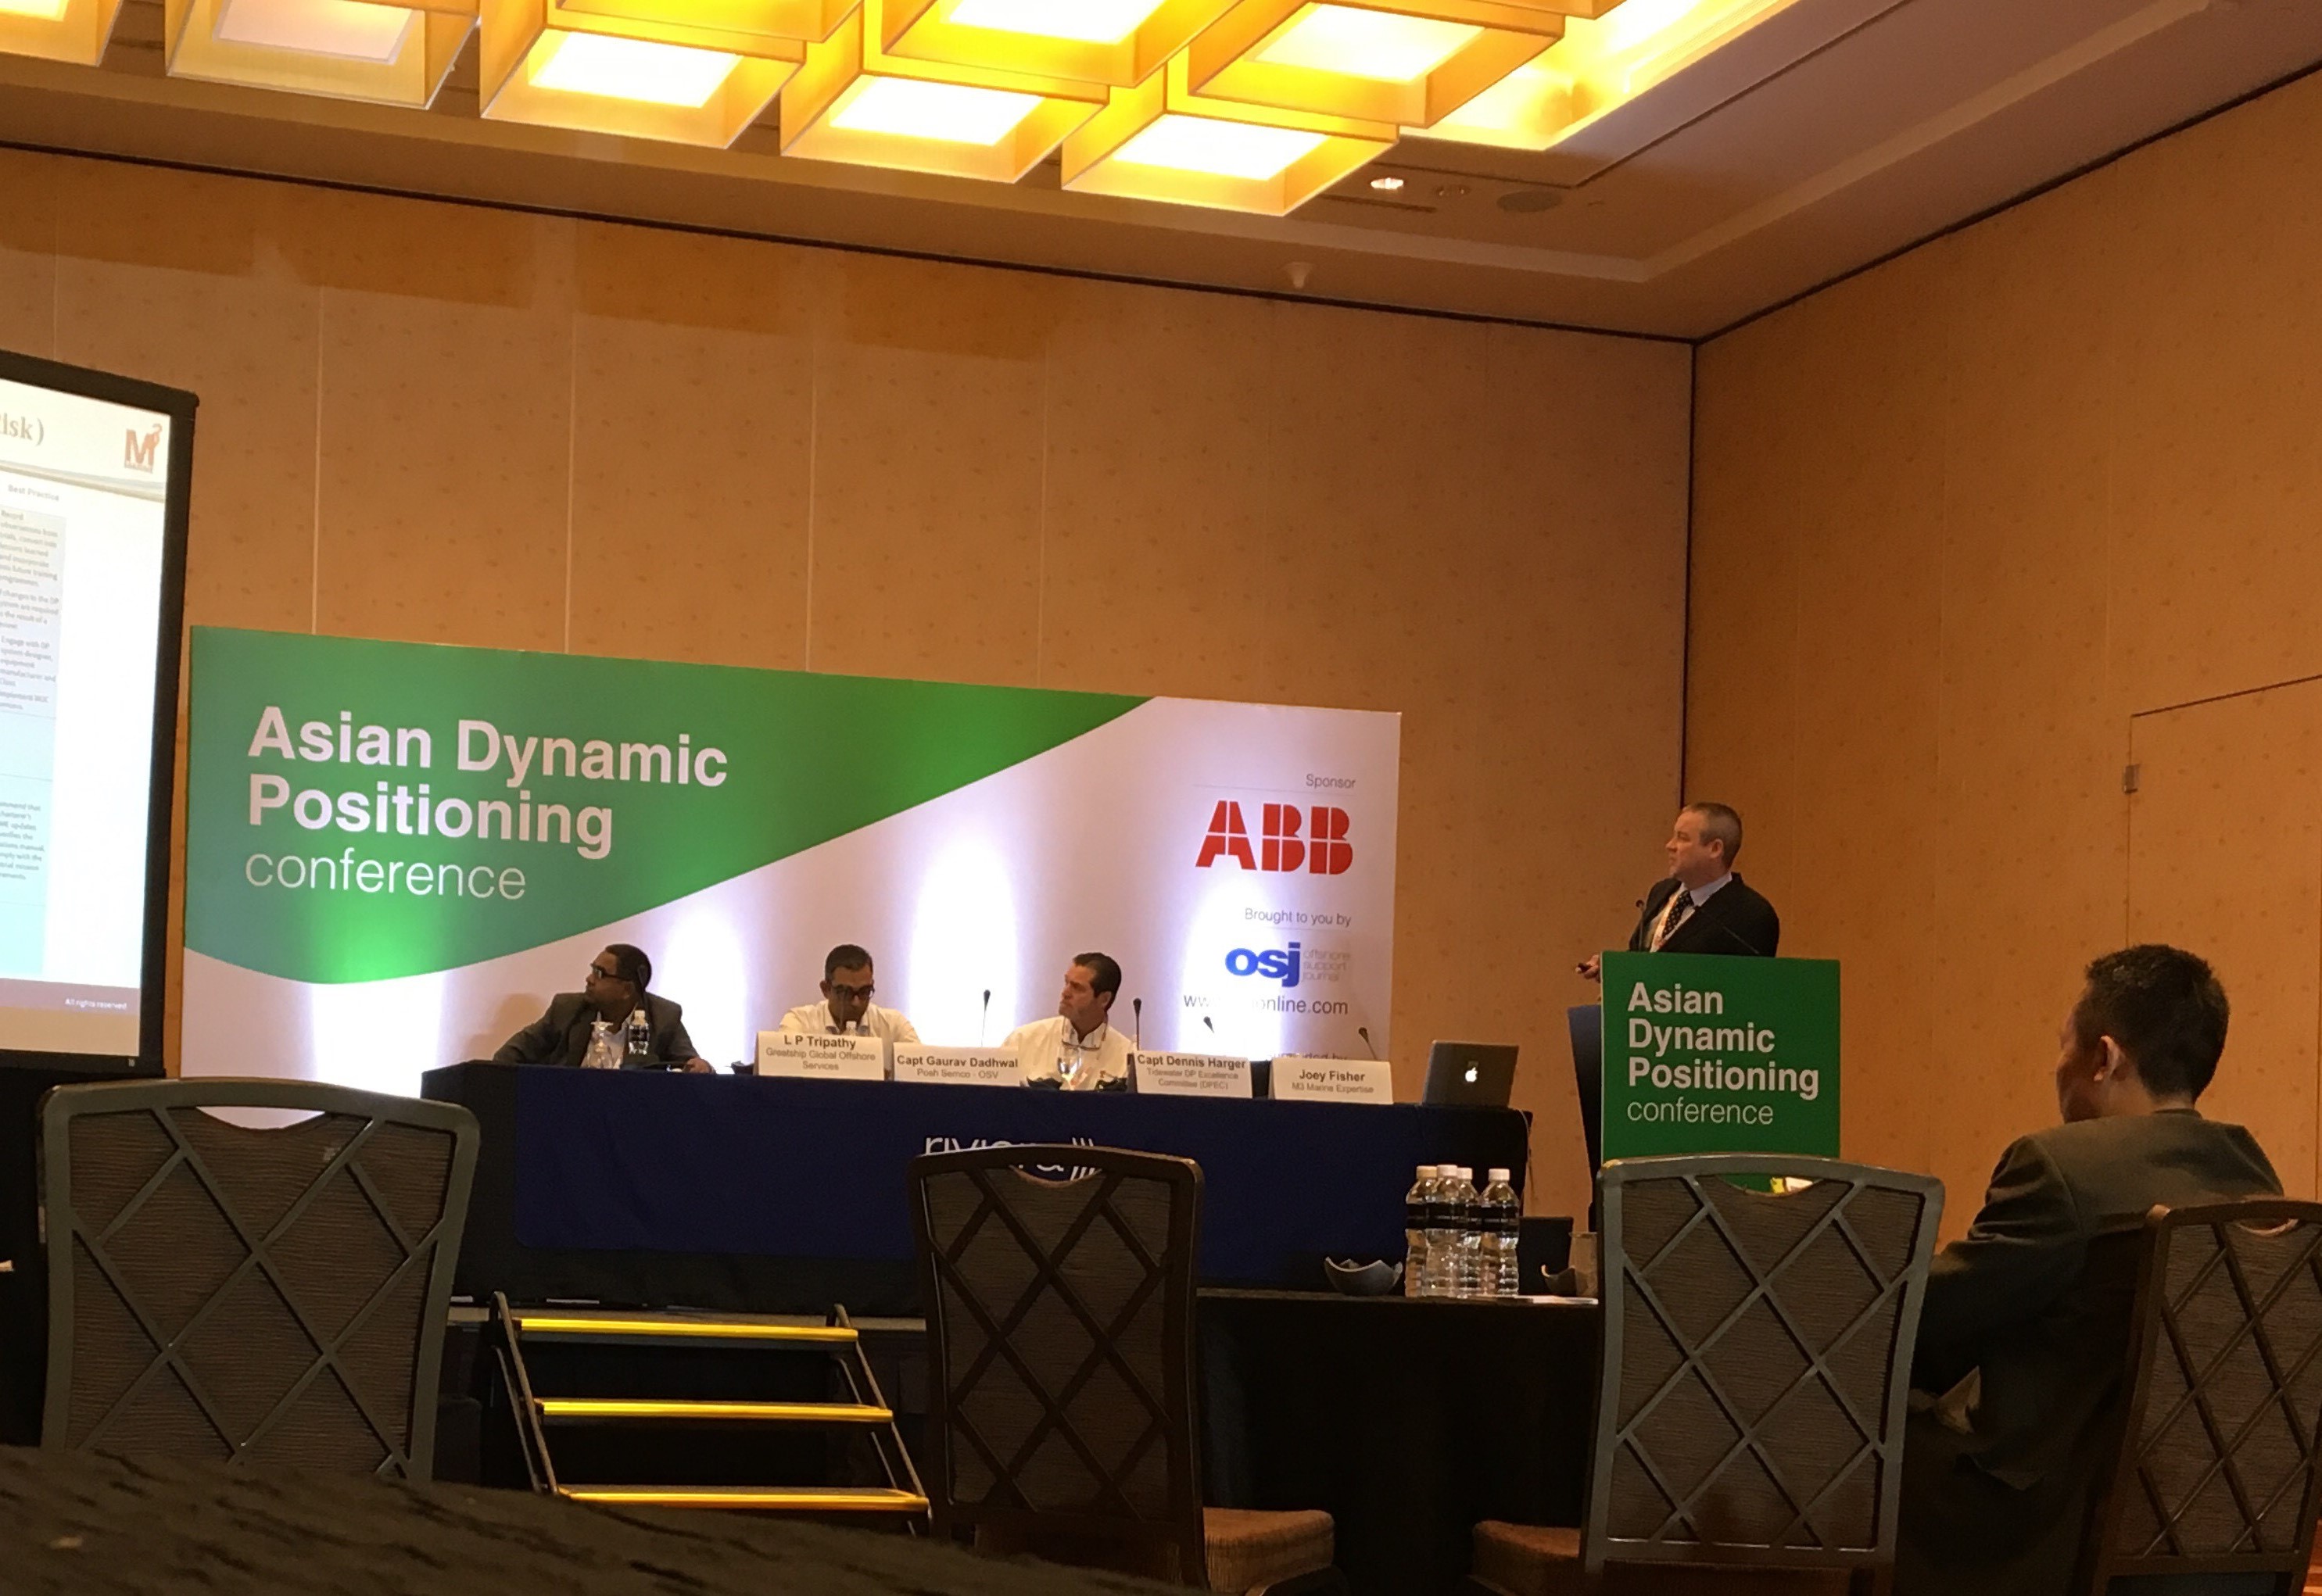 The Asian Dynamic Positioning Conference 2016